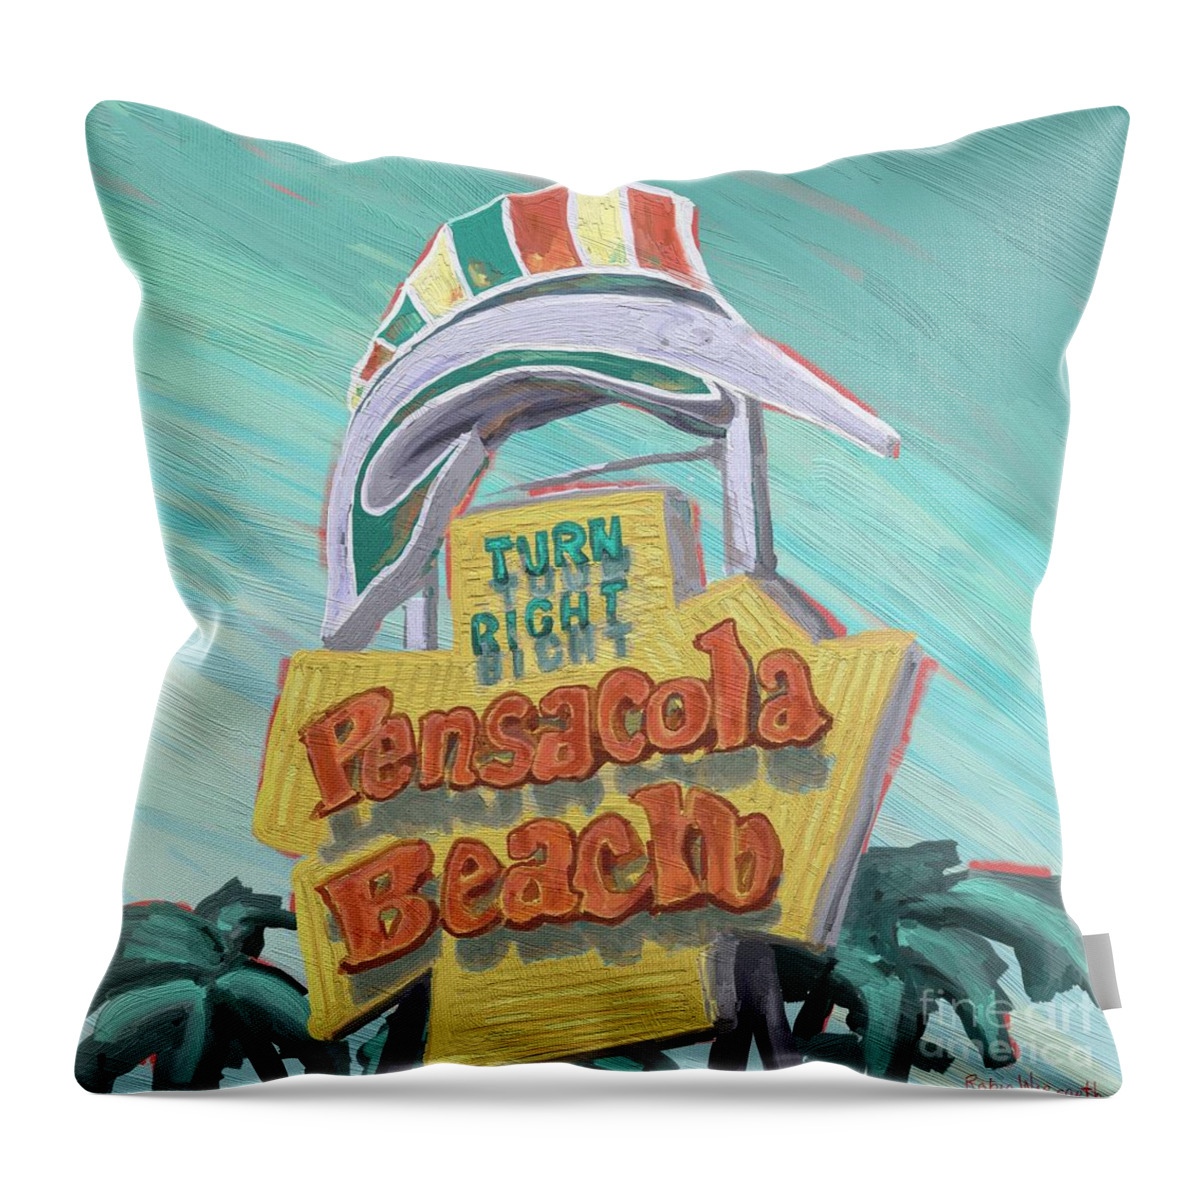 Vintage Throw Pillow featuring the digital art Pensacola Beach sign by Robin Wiesneth